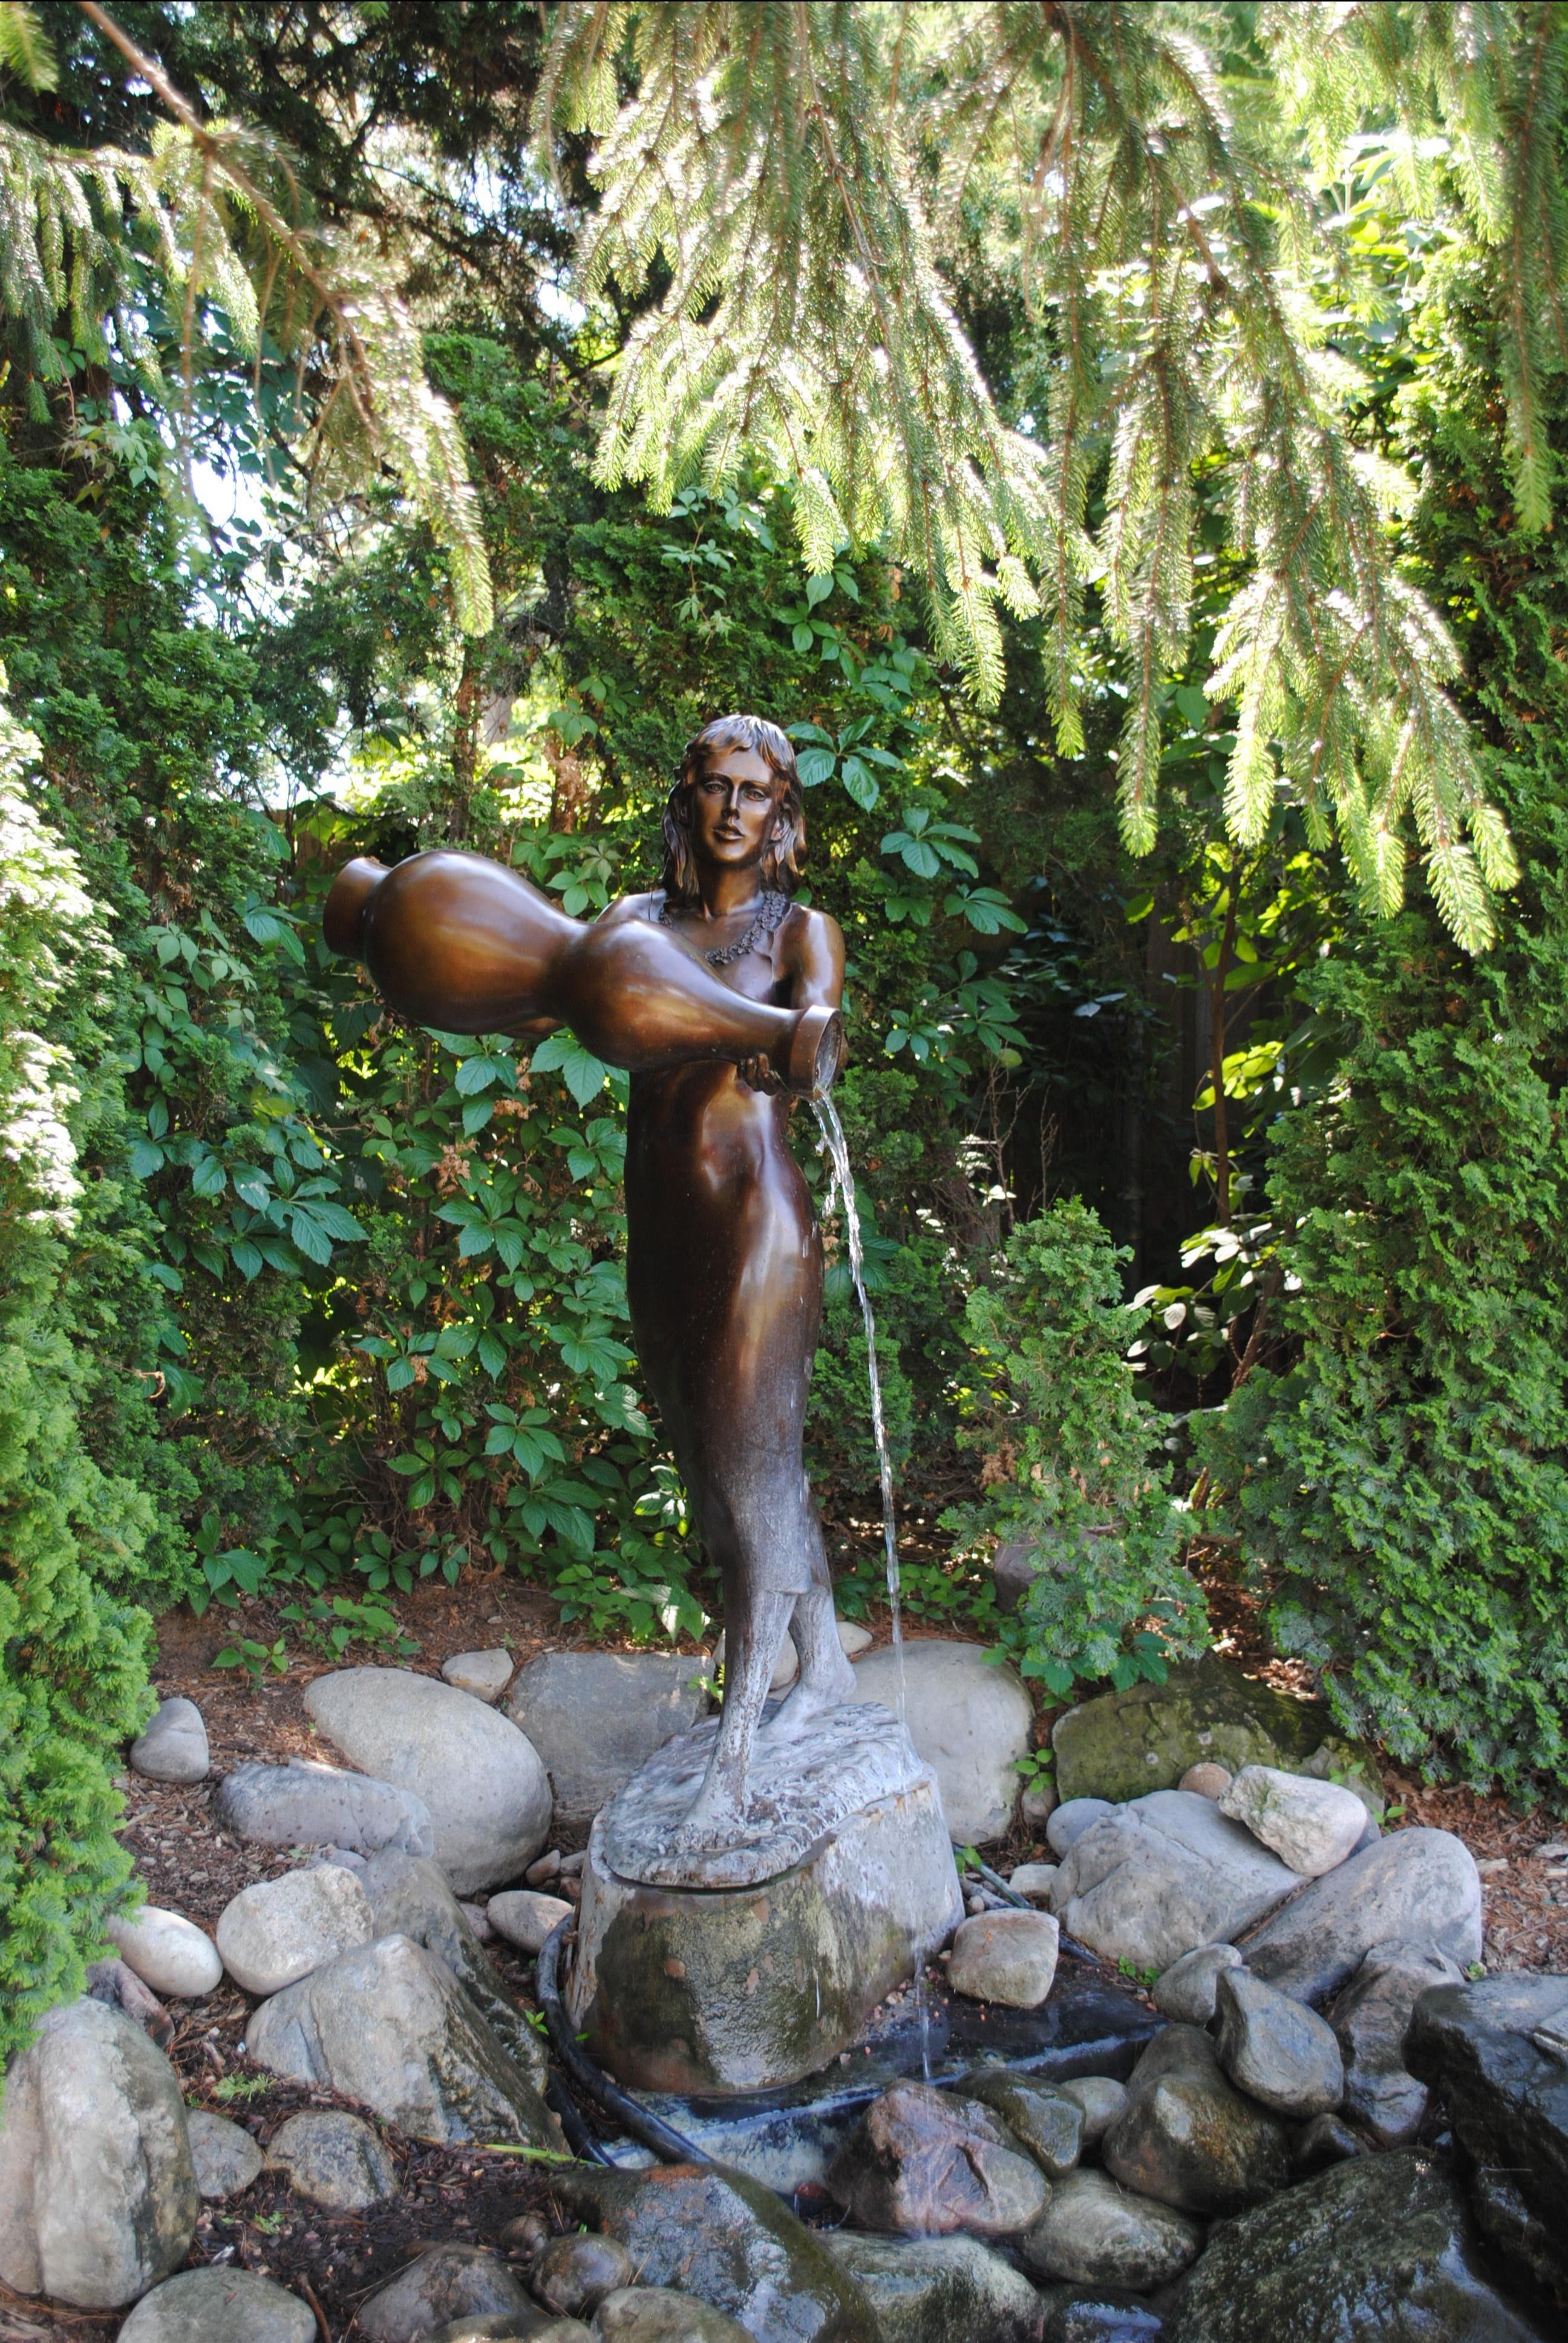 A full body shot of the bronze sculpture of Rebekah at the Well, featuring the young woman pouring the water into the water and rocks below her pedestal